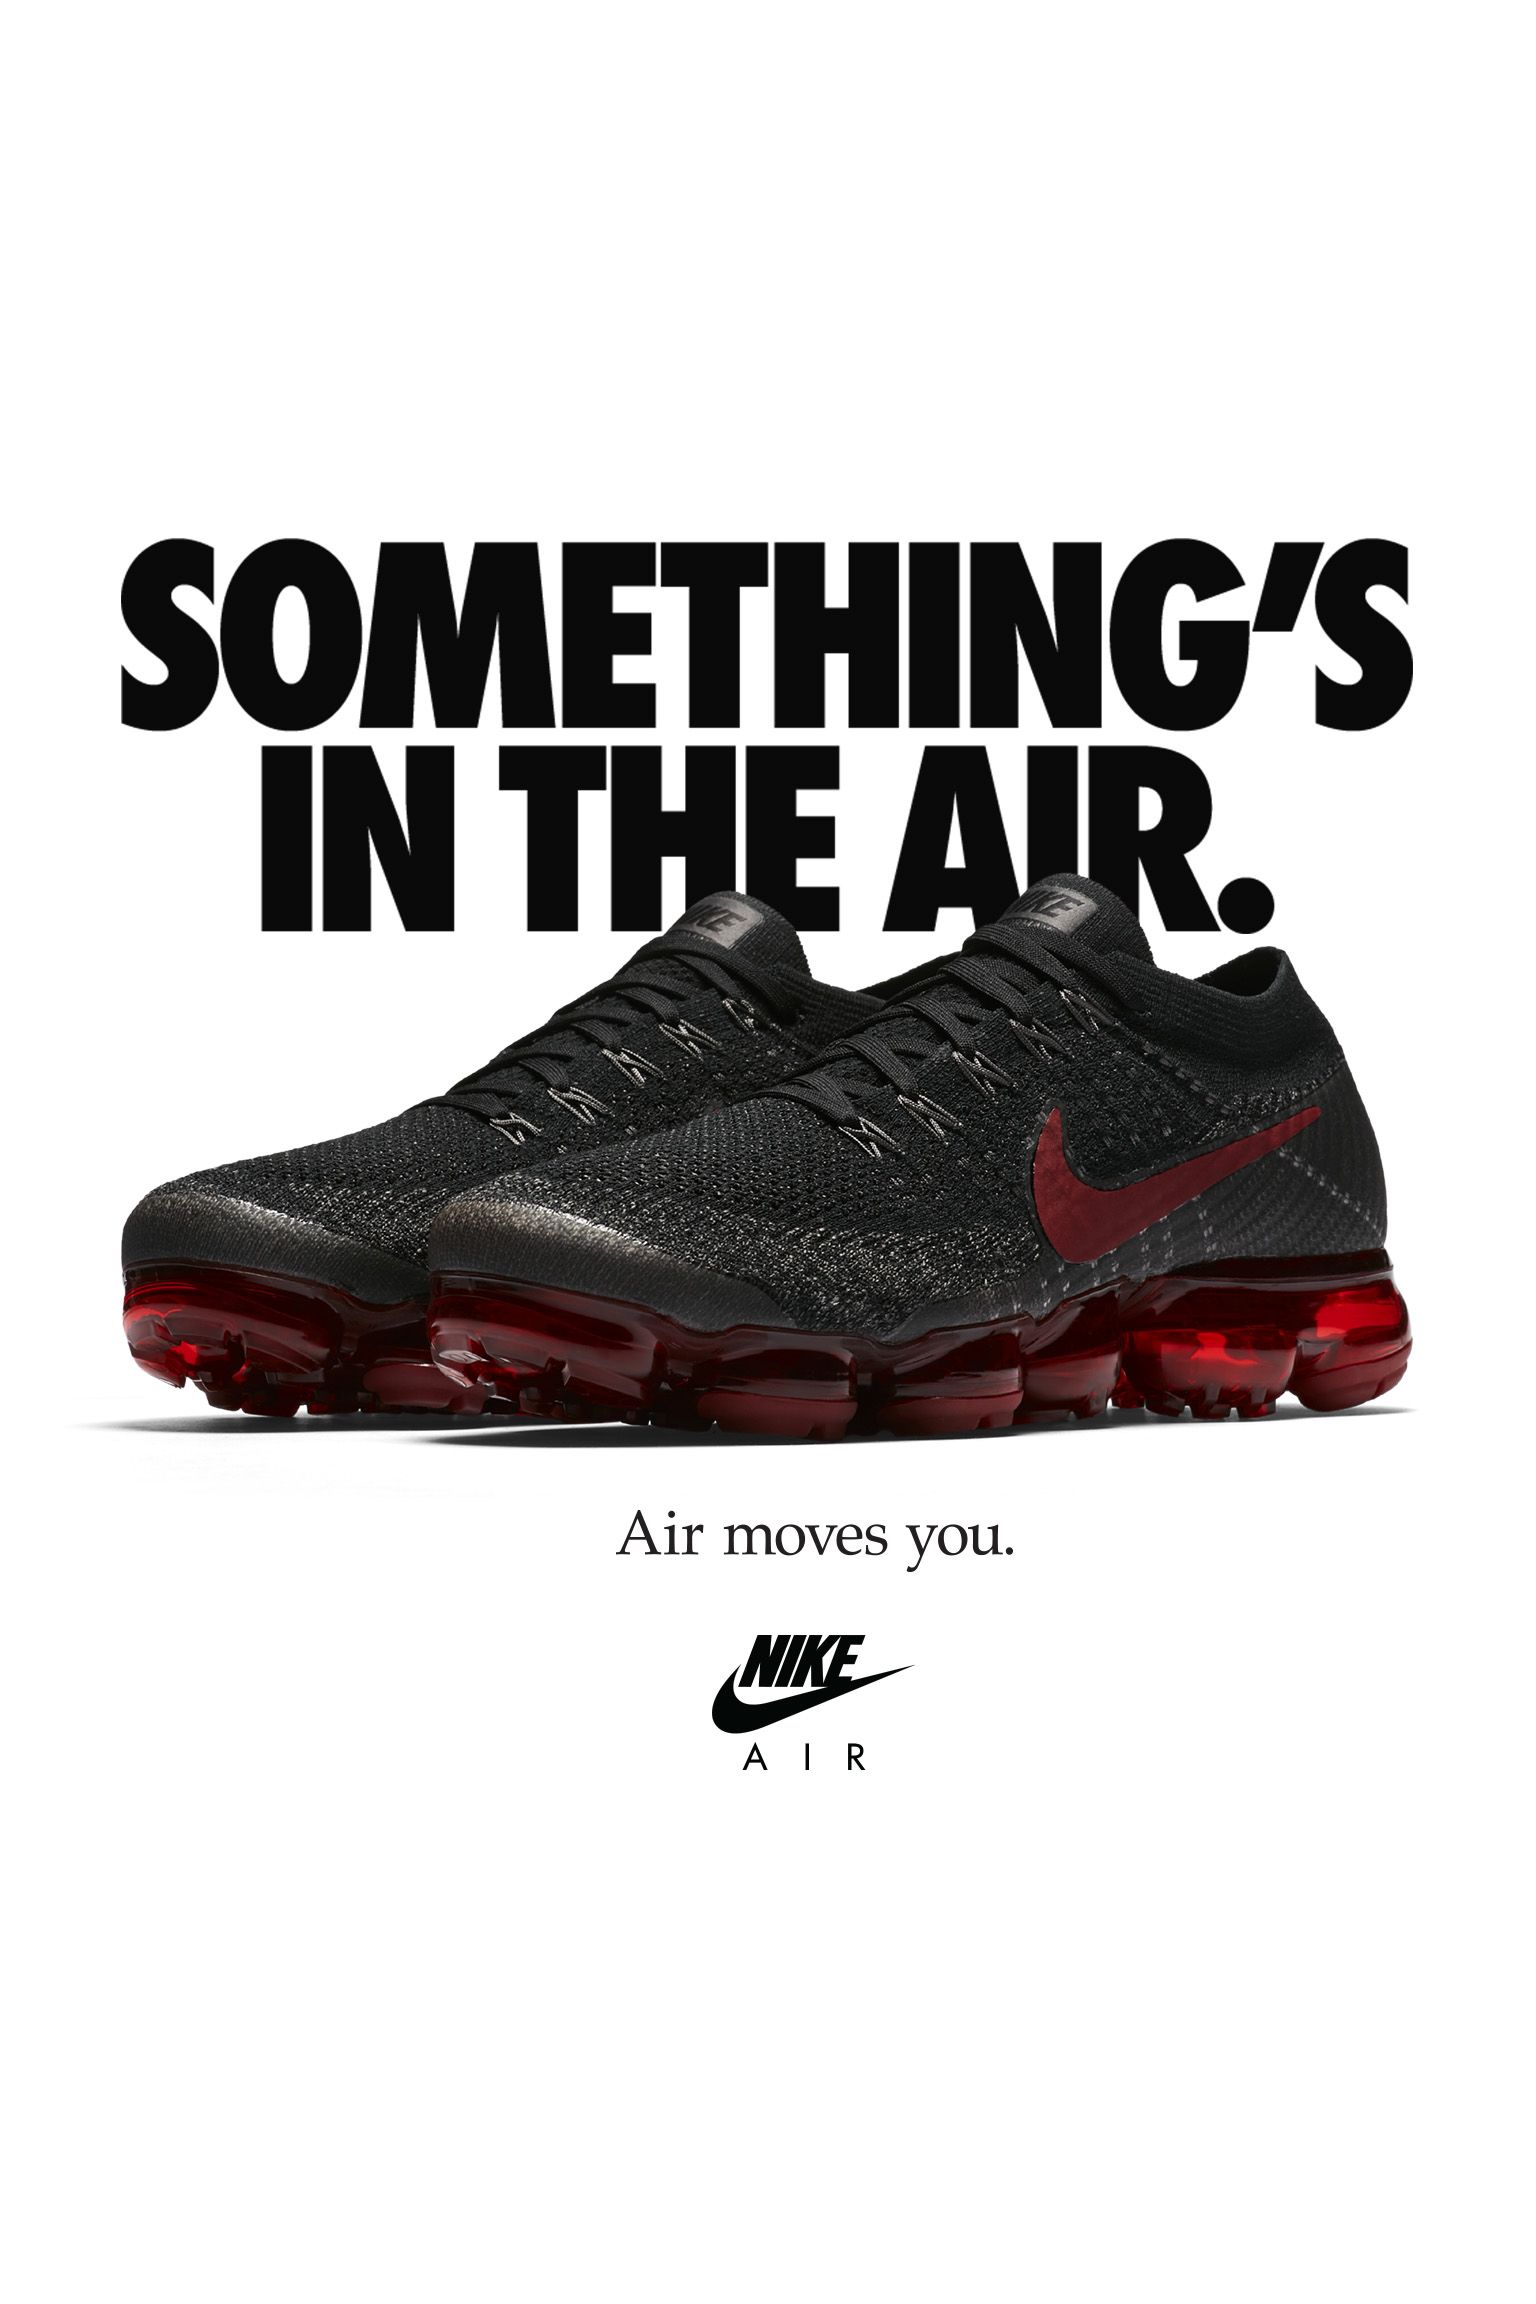 vapormax nike black and red